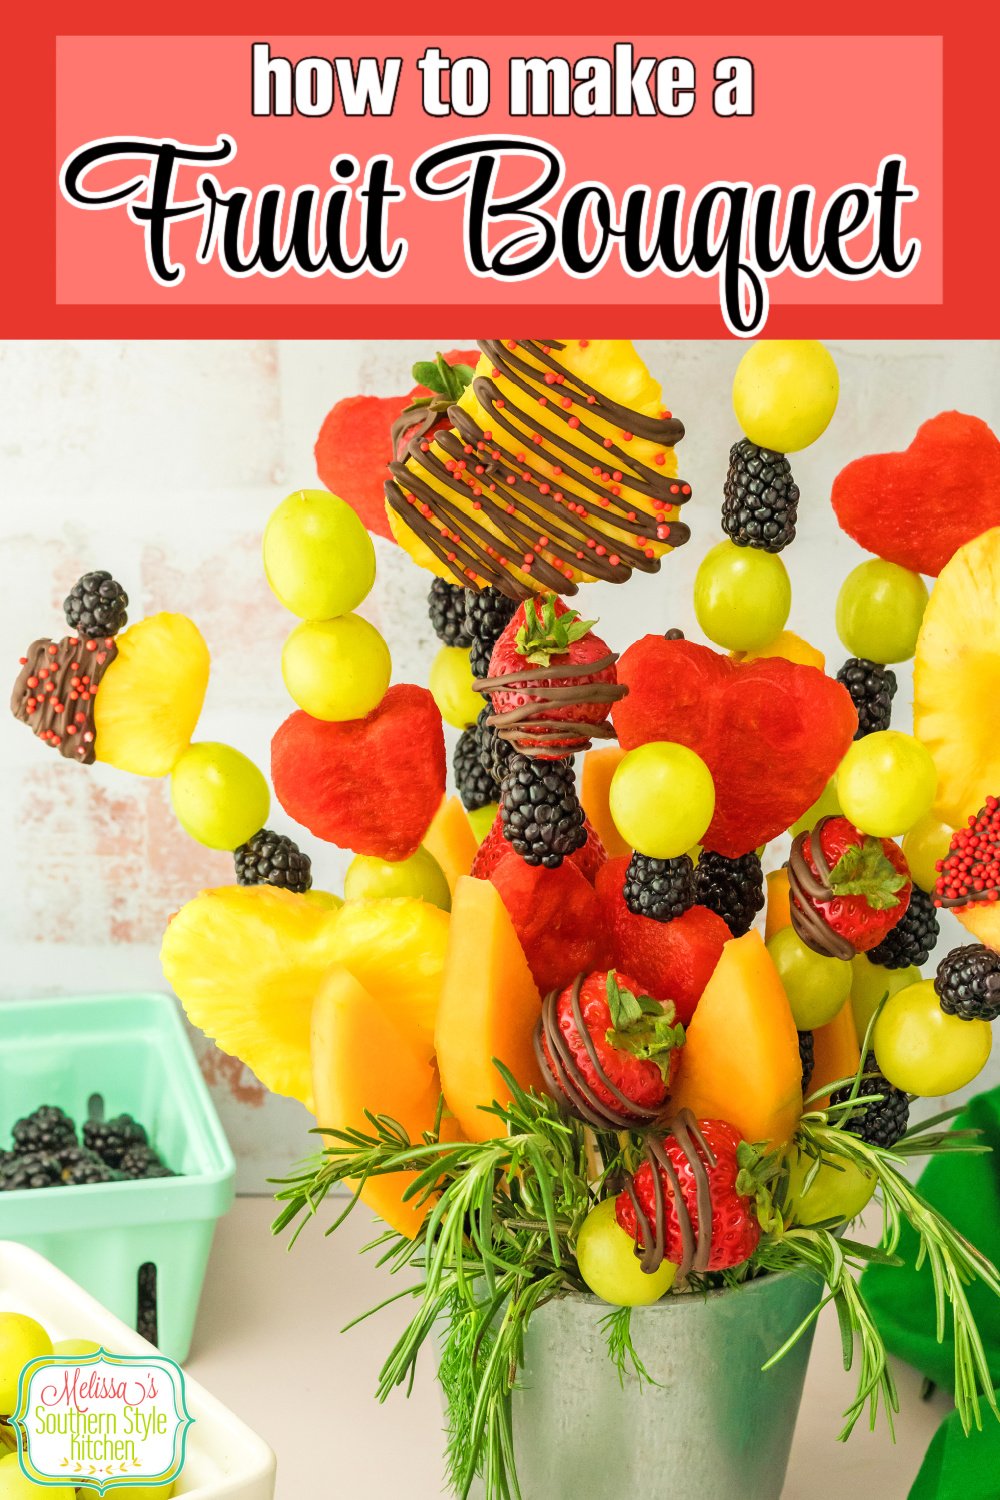 Share this Fruit Bouquet with the special people in your lives #fruitbouquet #howtomakeafruitbouquet #bestfruitbouquets #Valentinedaydesserts #valentinesdaygifts #freshfruit #fruit #fruitrecipes #dessert #dessertrecipes #homemadegifts